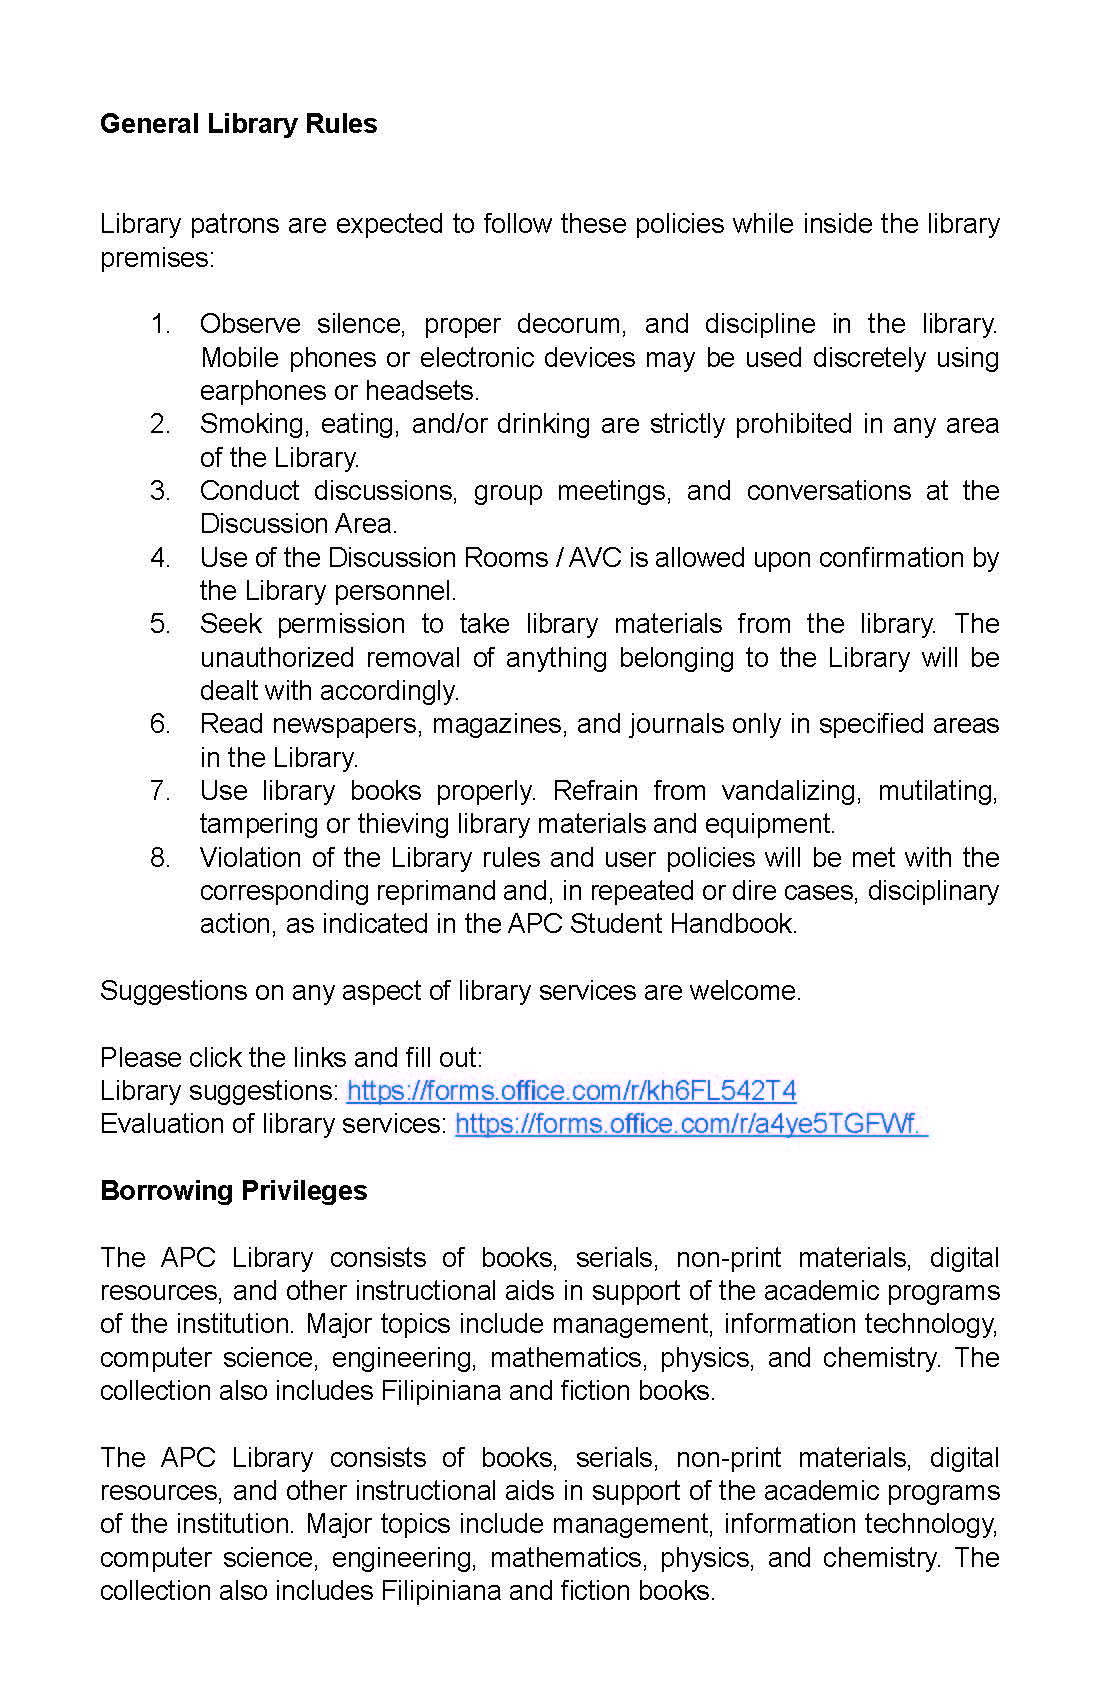 Library Playbook_Page_02